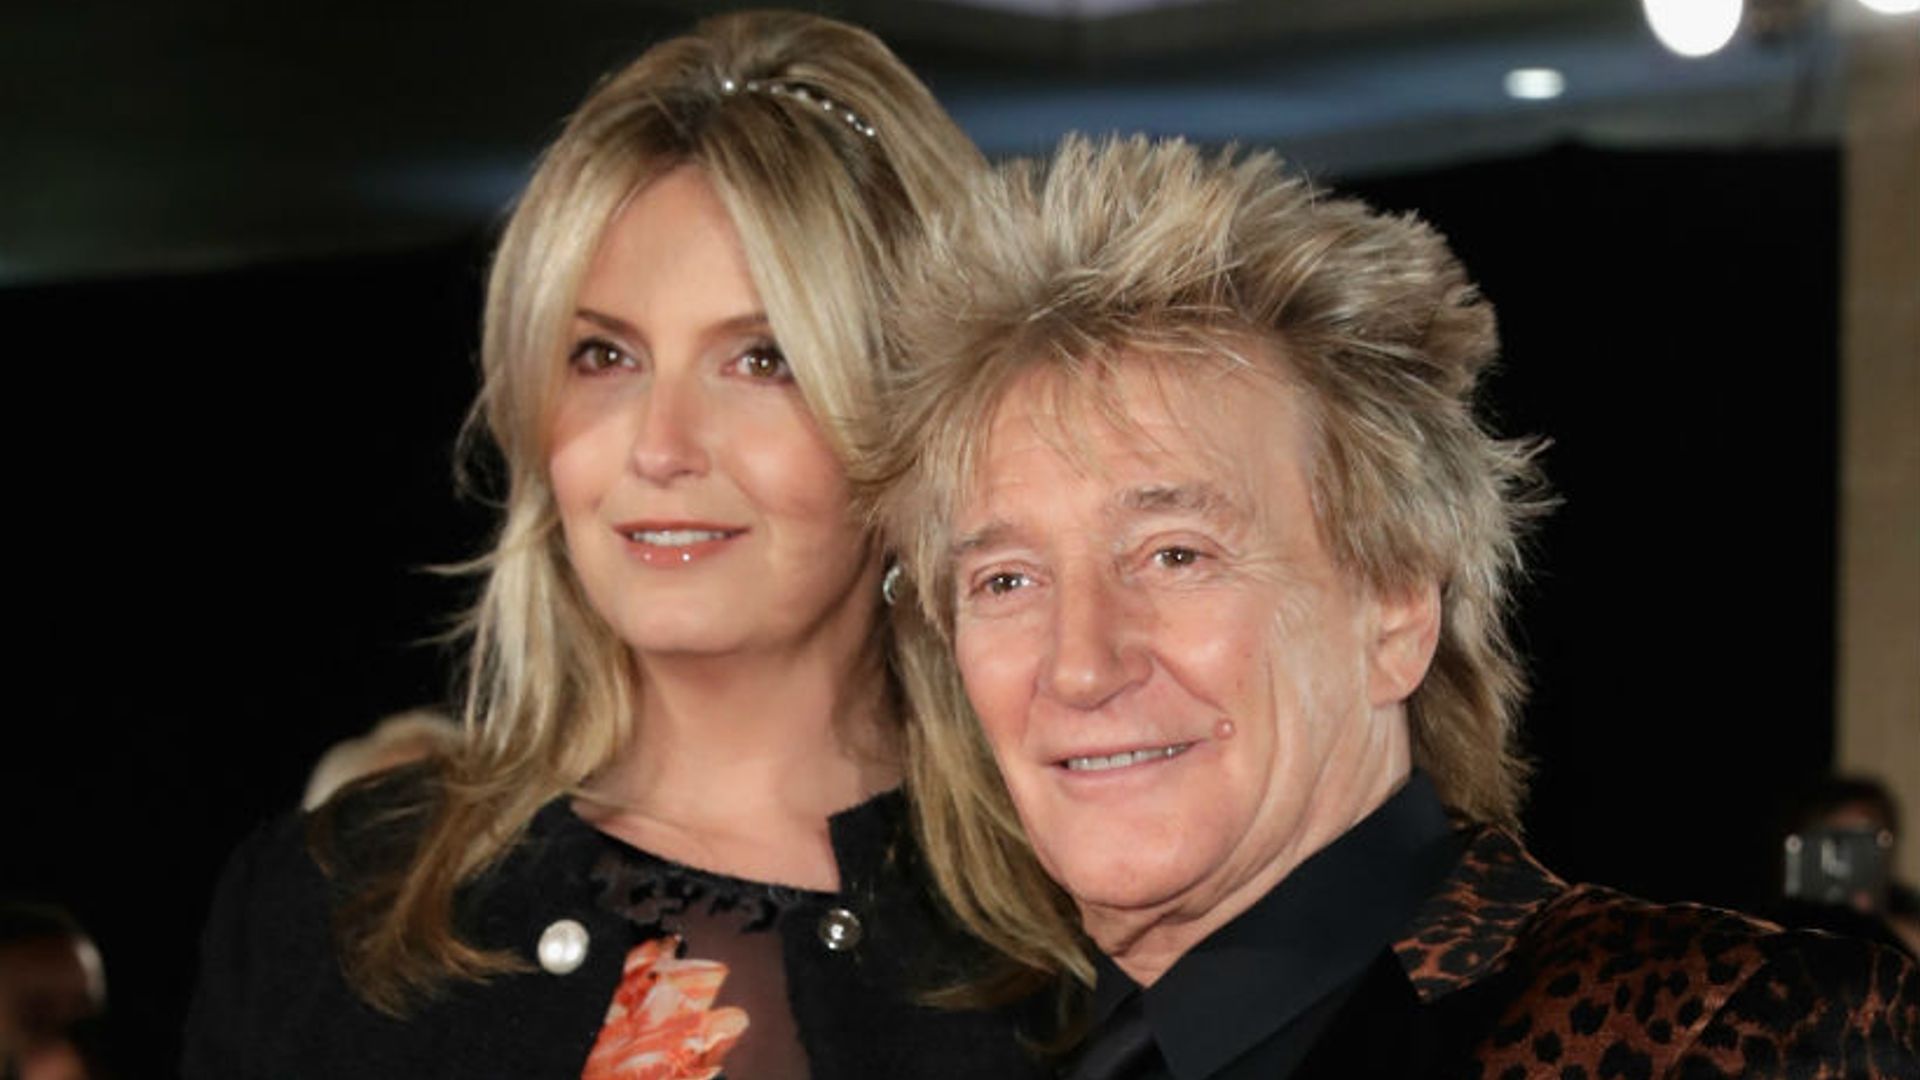 Penny Lancaster's son Alastair is all grown up – and looks just like his mum